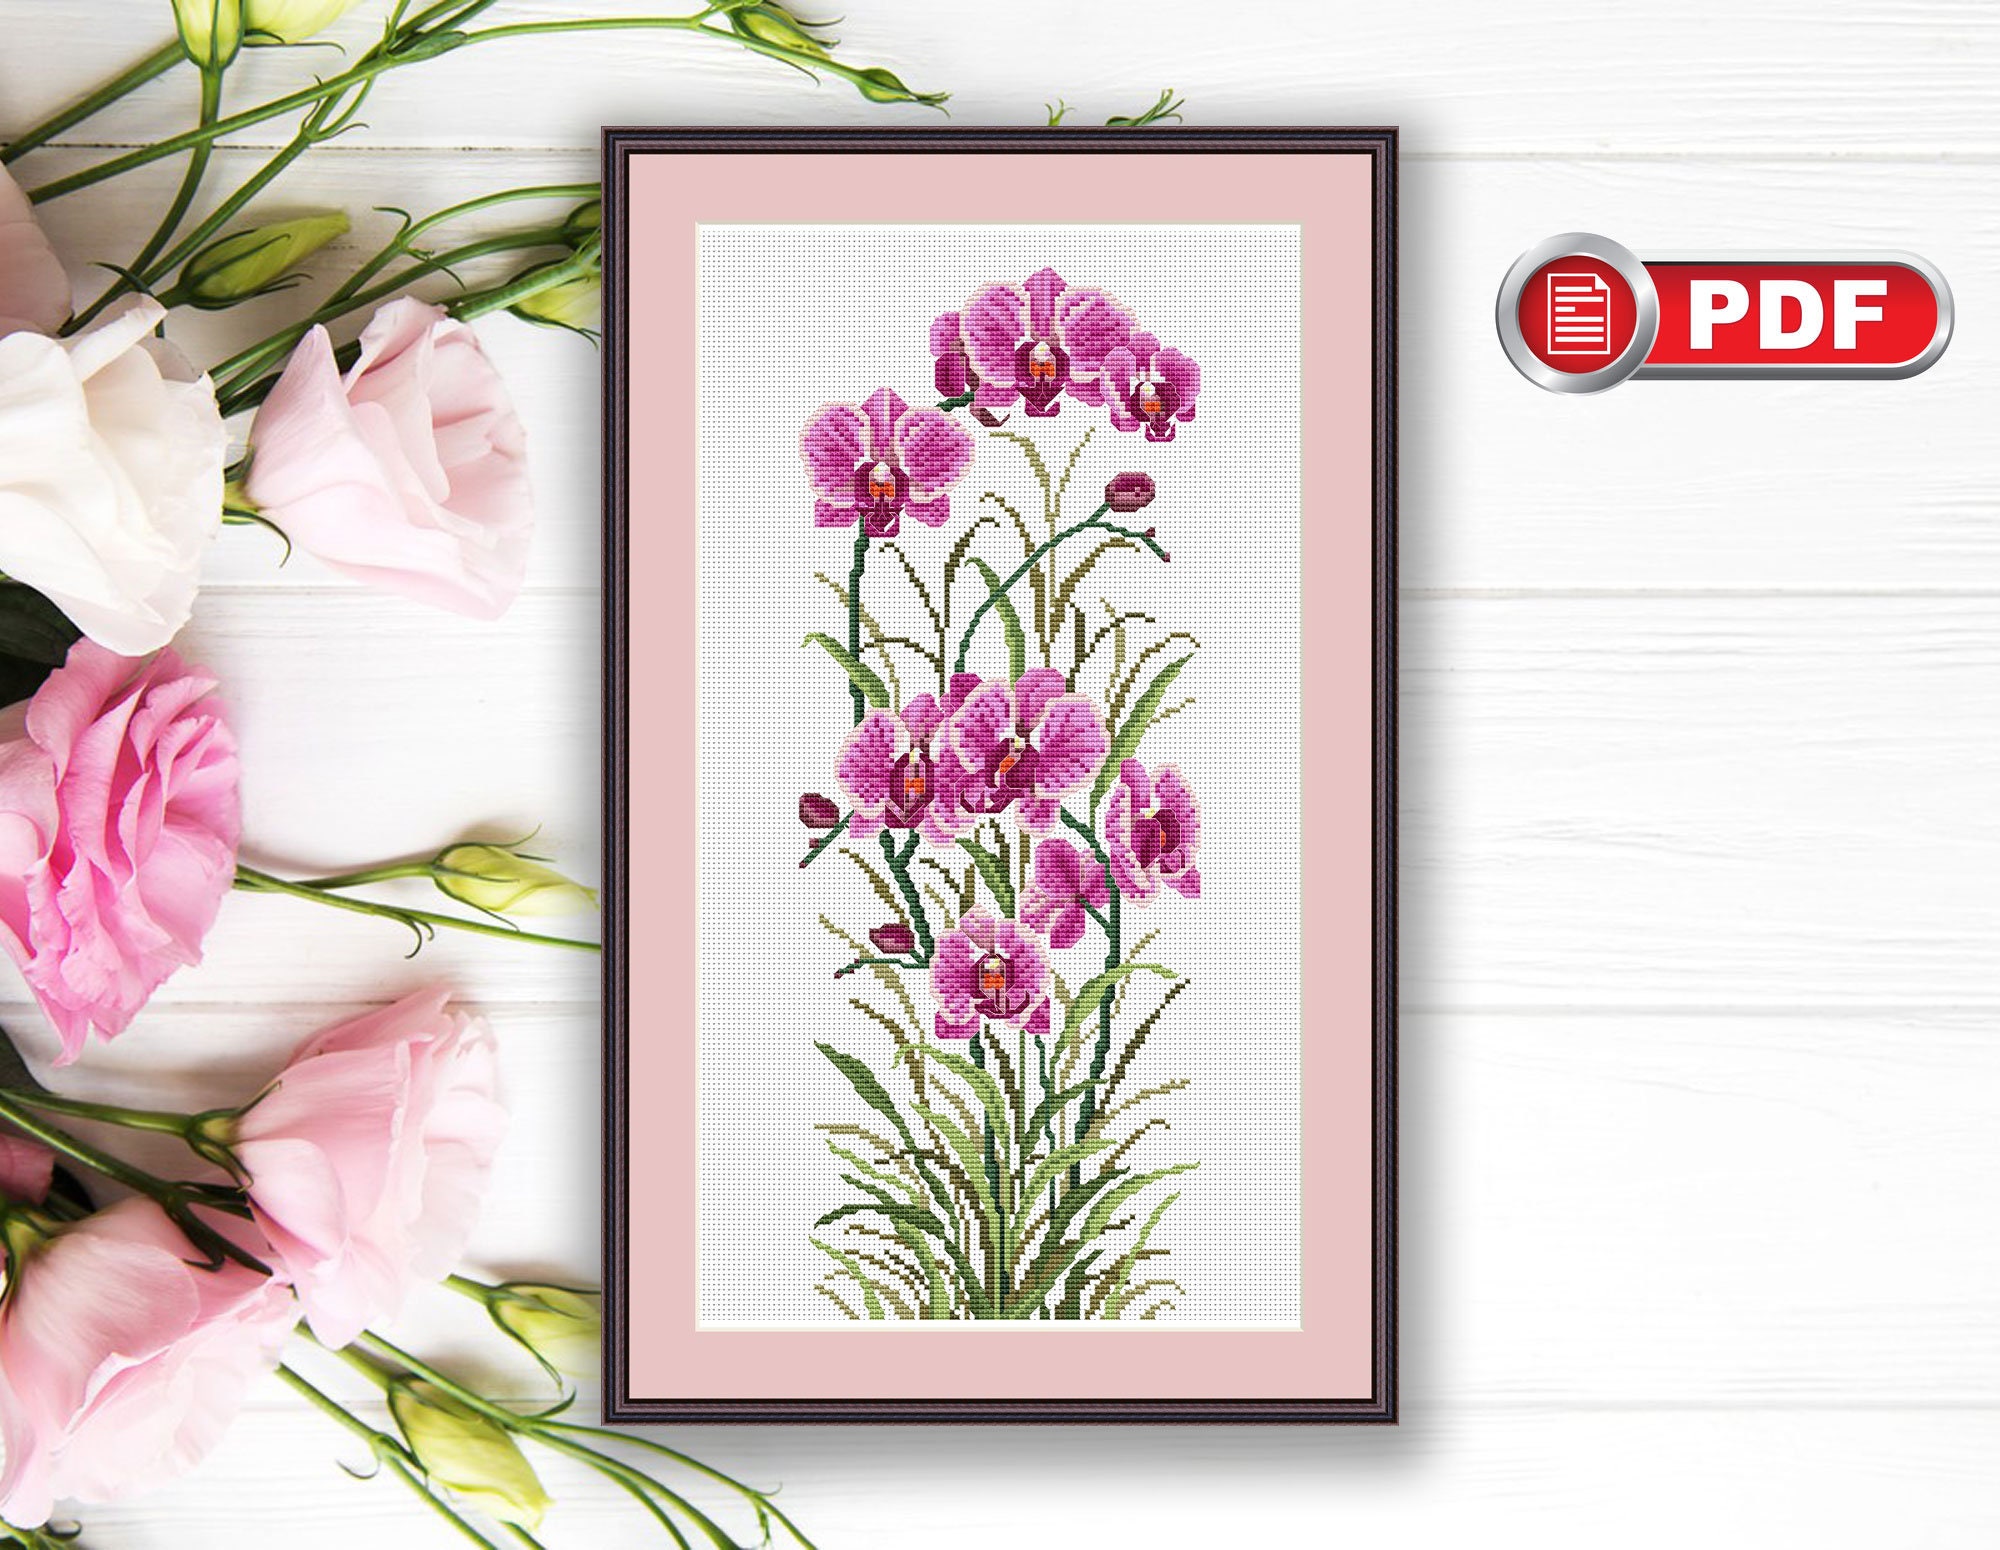 Orchid Bead Embroidery Kit Floral DIY 3D Needlepoint Tapestry Handcraft Kit White Nosegay Beaded Cross Stitch Pattern Seed Beads Perle